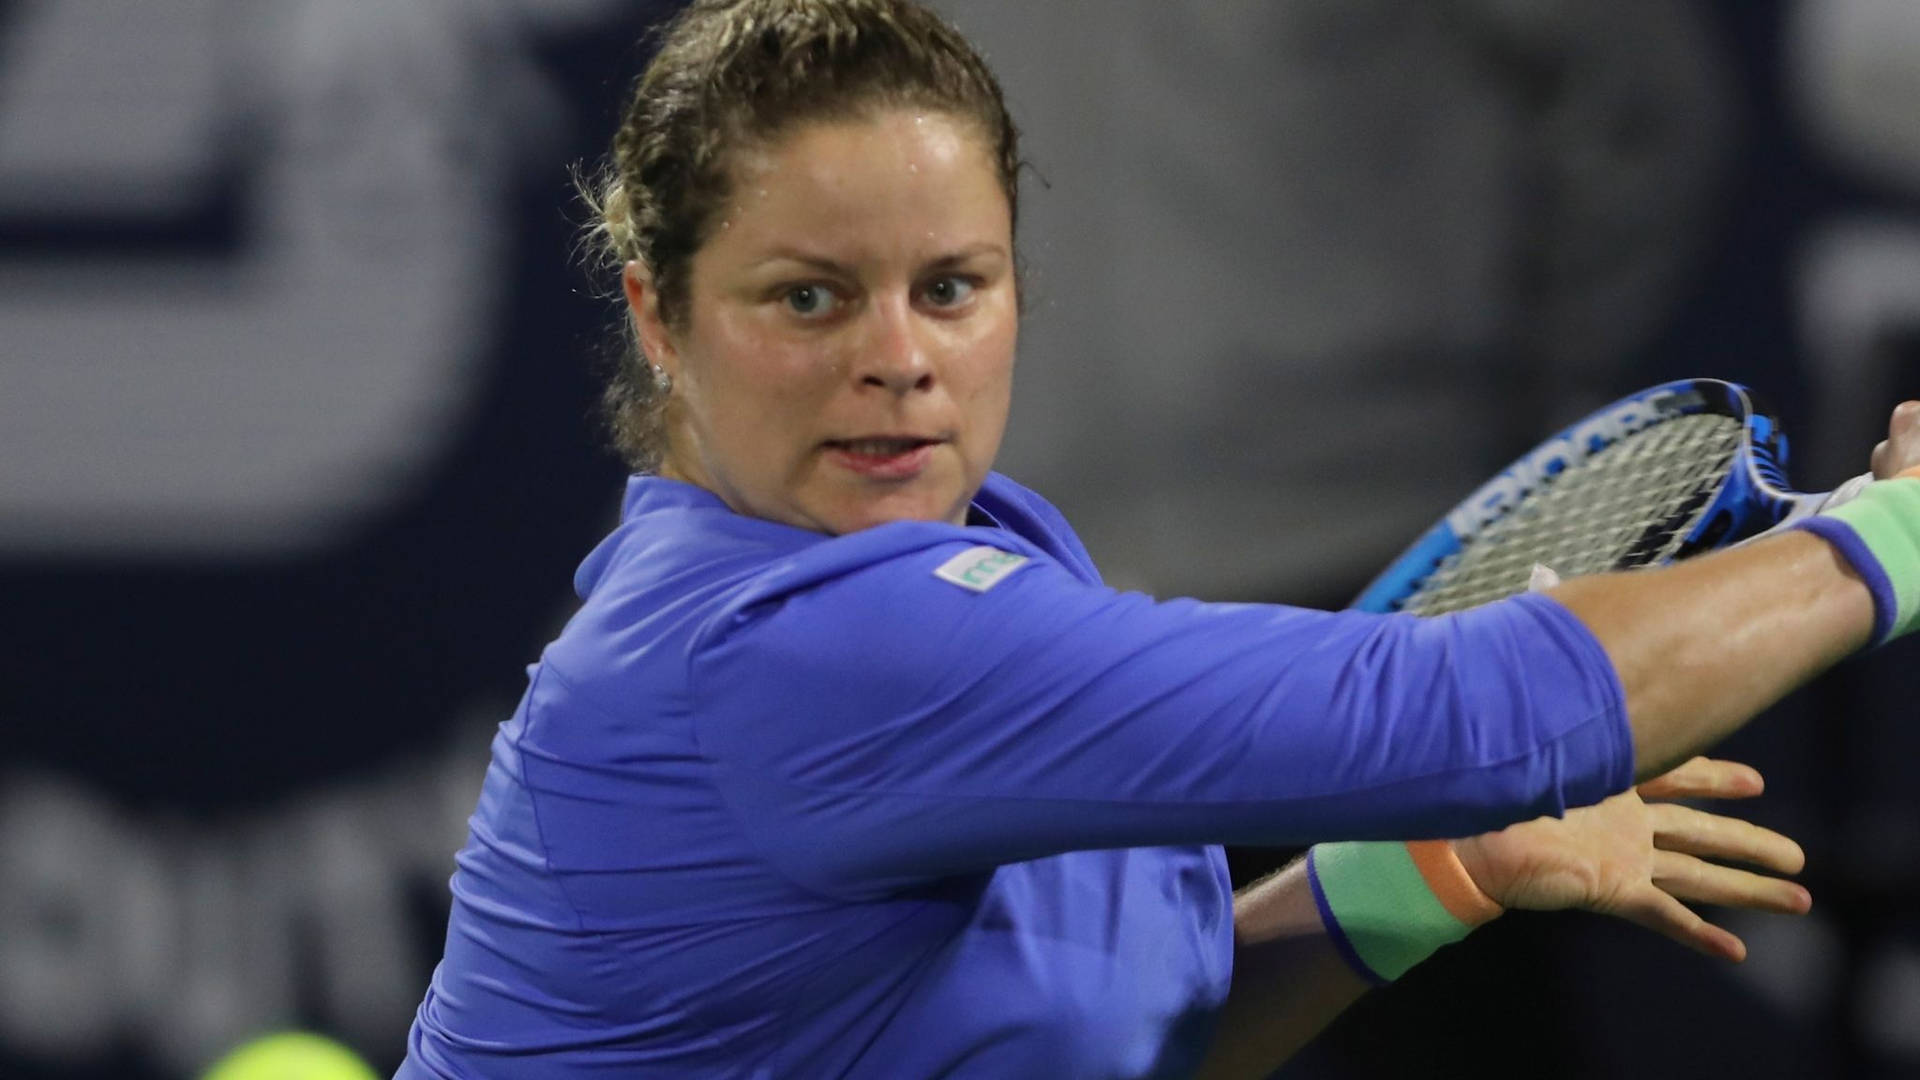 Kimclijsters Professionelle Athletin Wallpaper